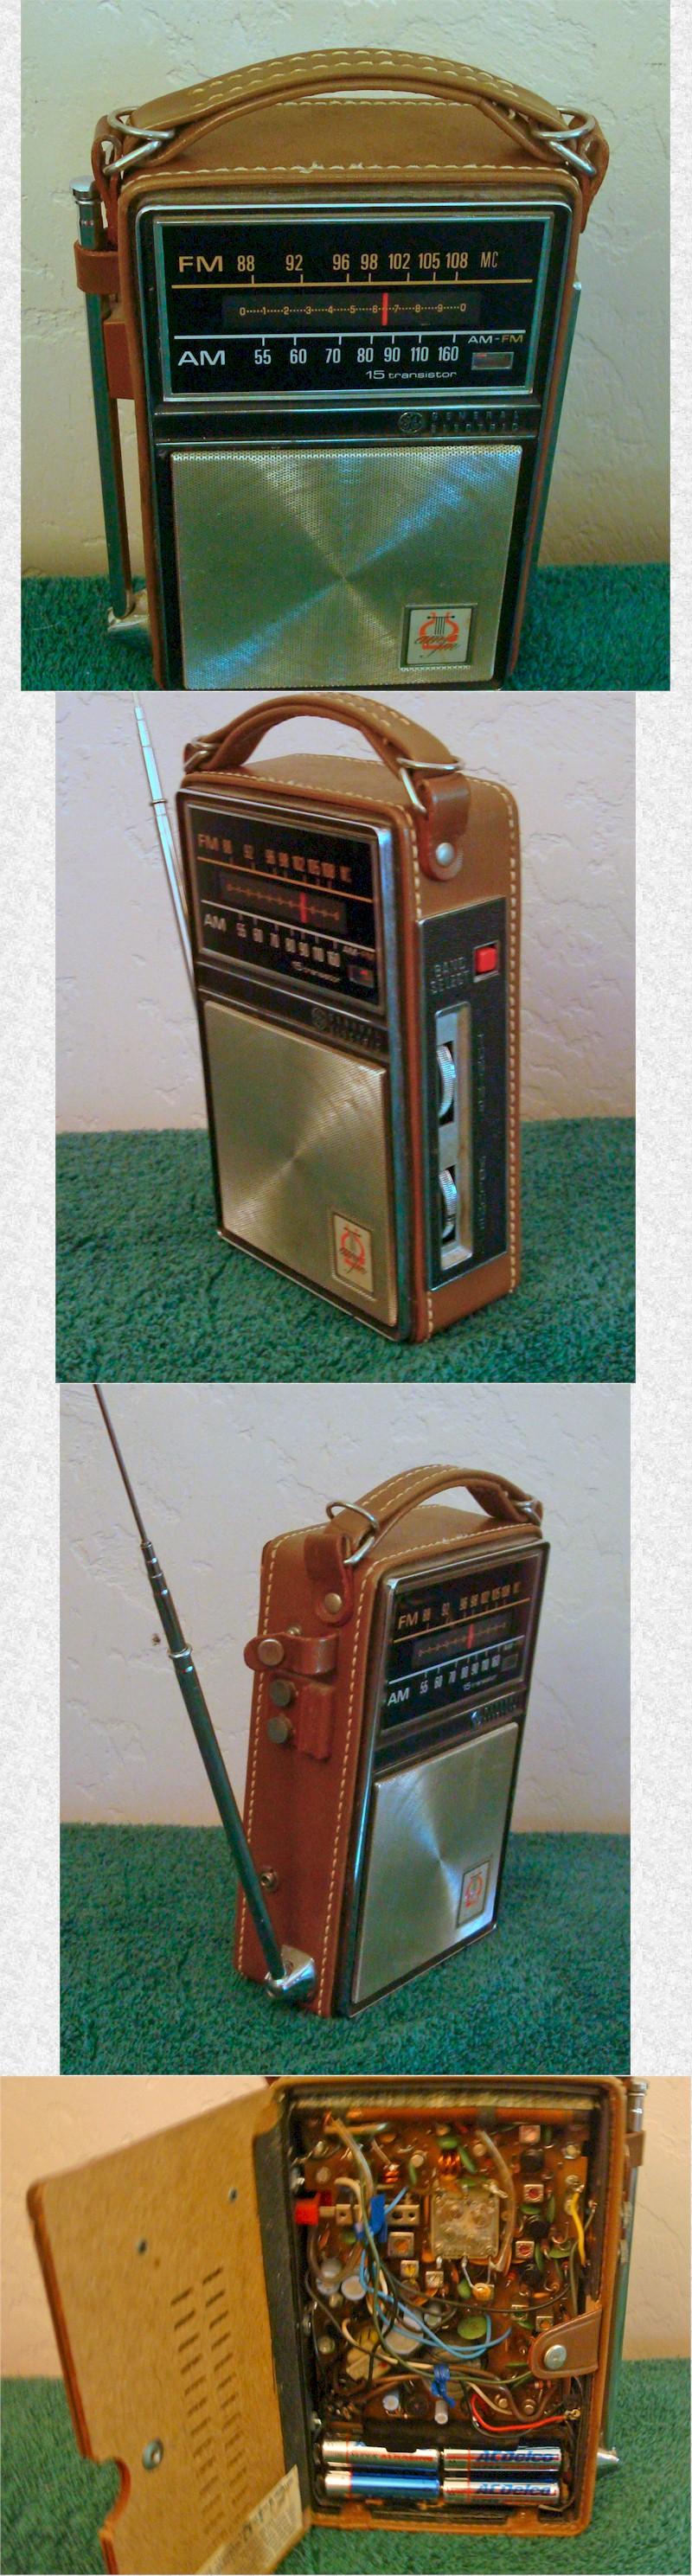 General Electric P975A Portable (1964)